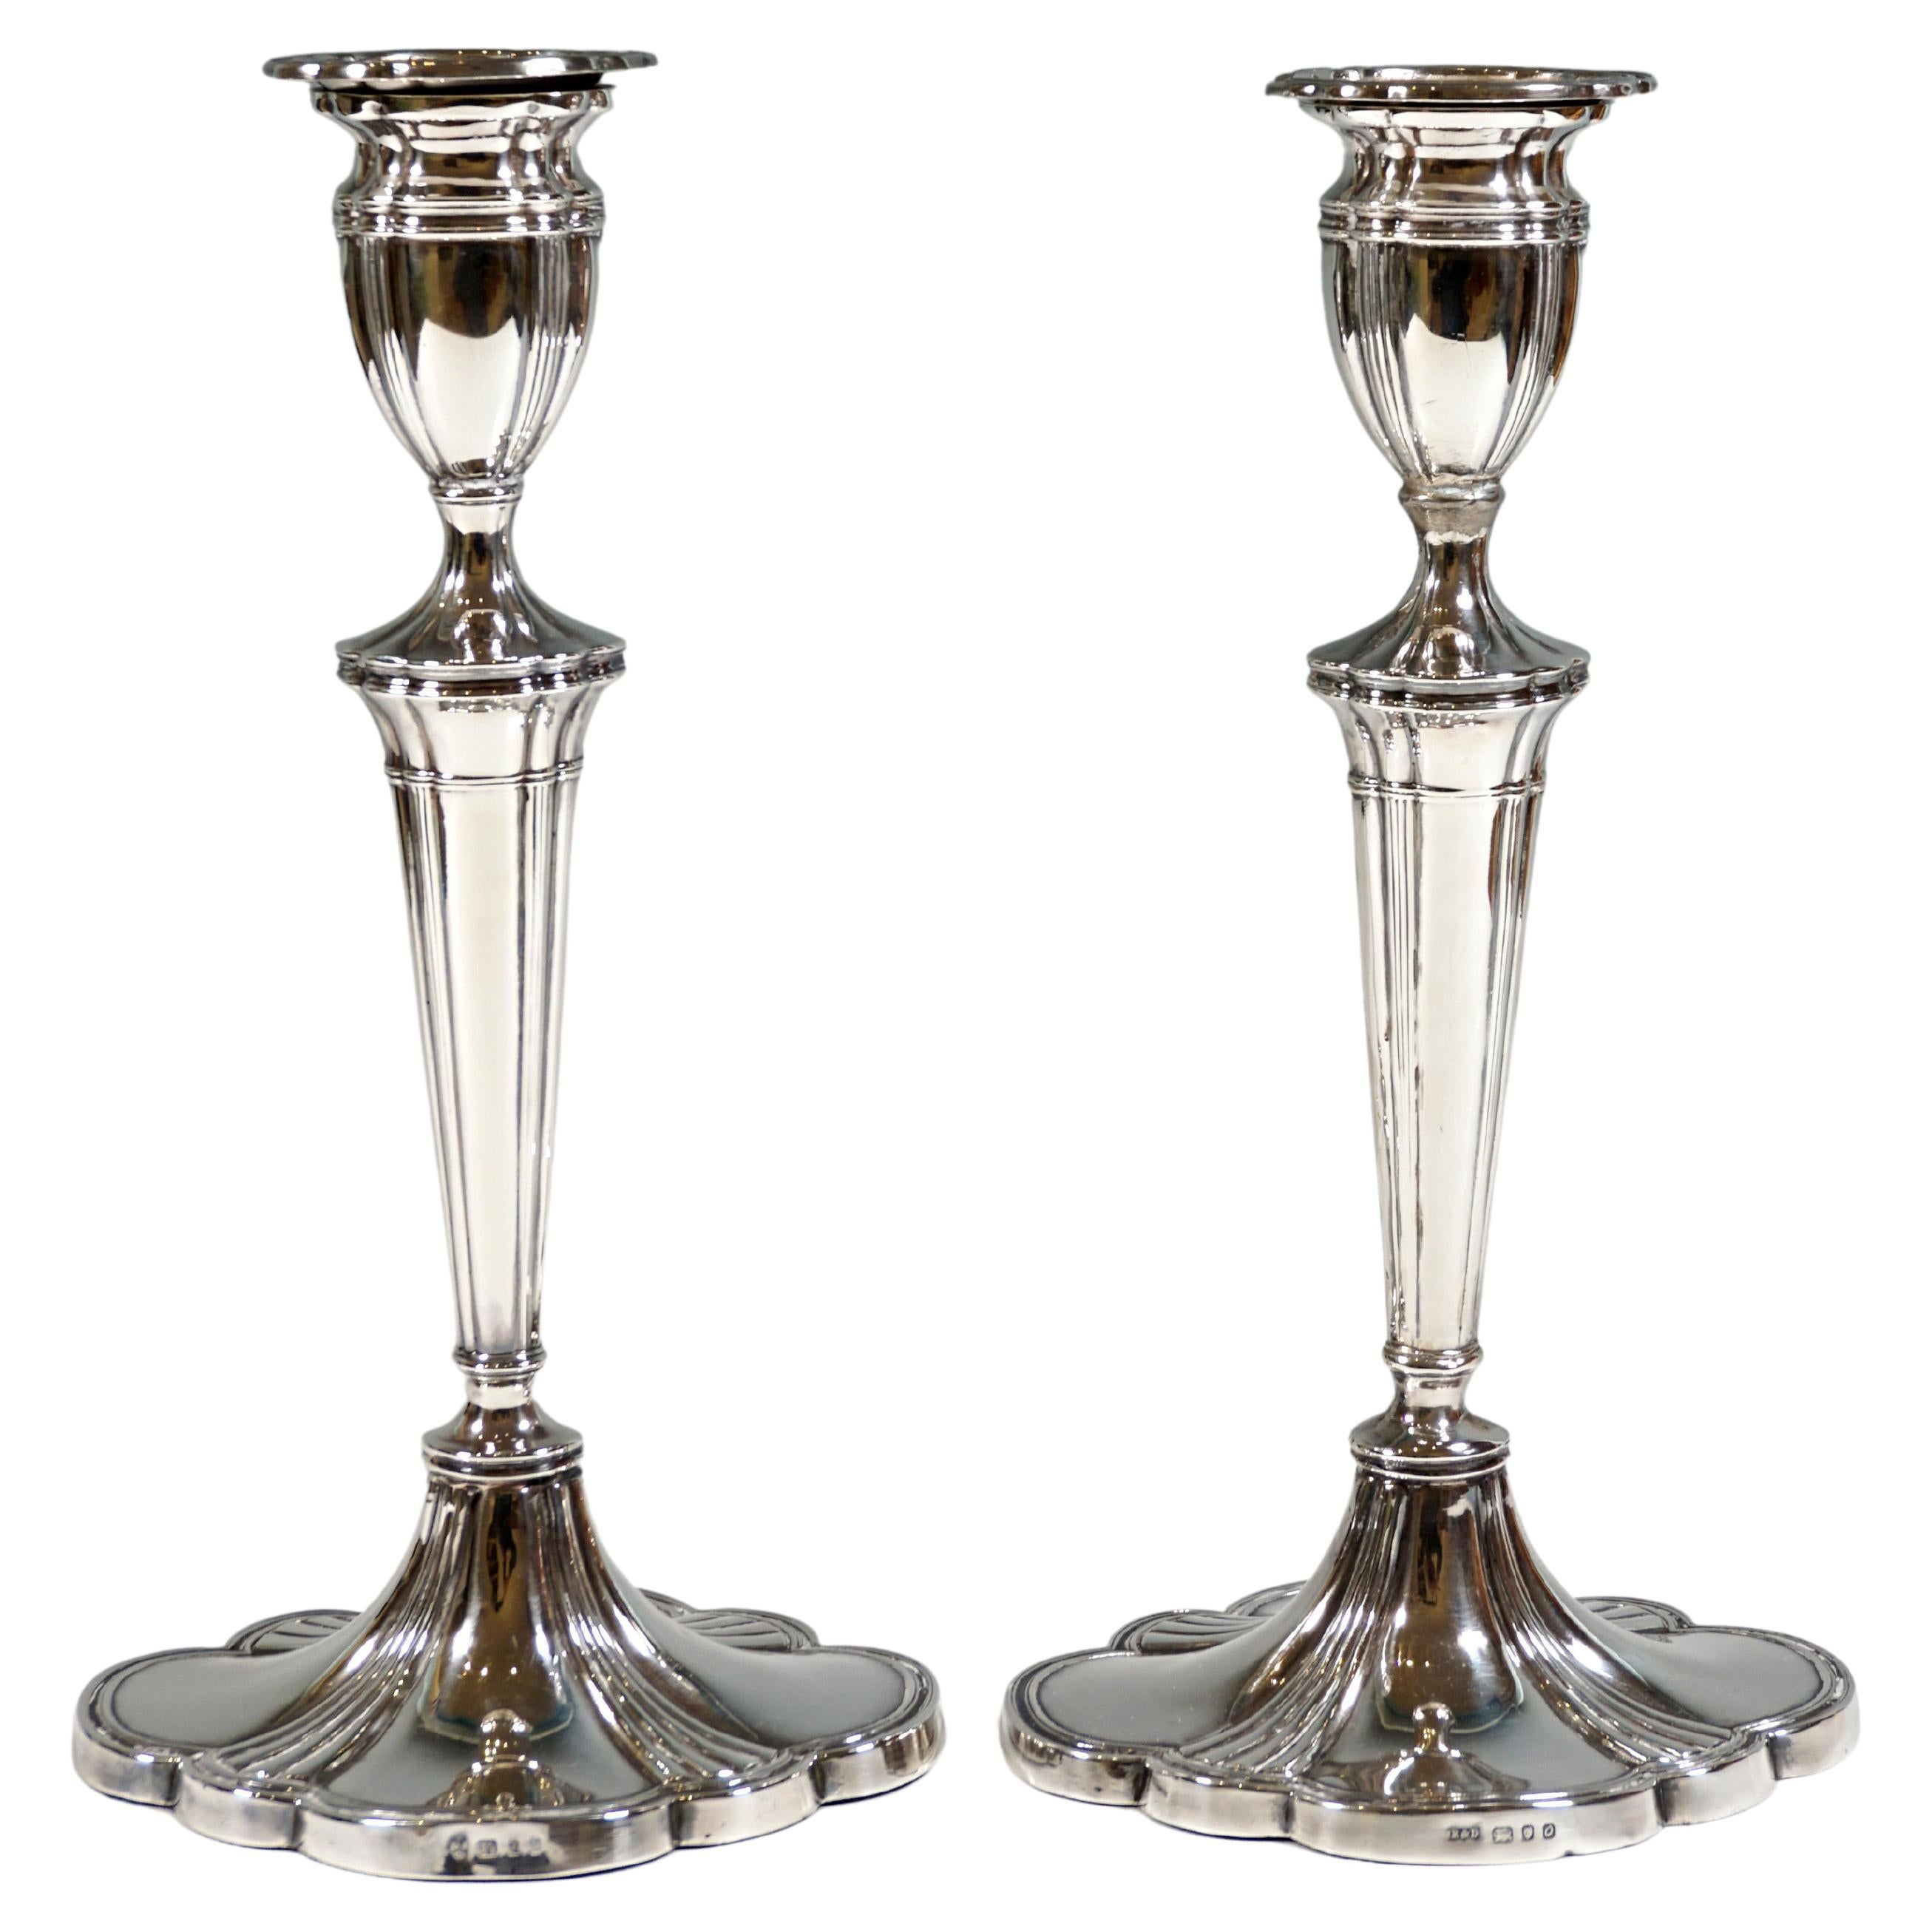 Pair of Elegant Silver 925 Candle Holders, London, England, 20th Century